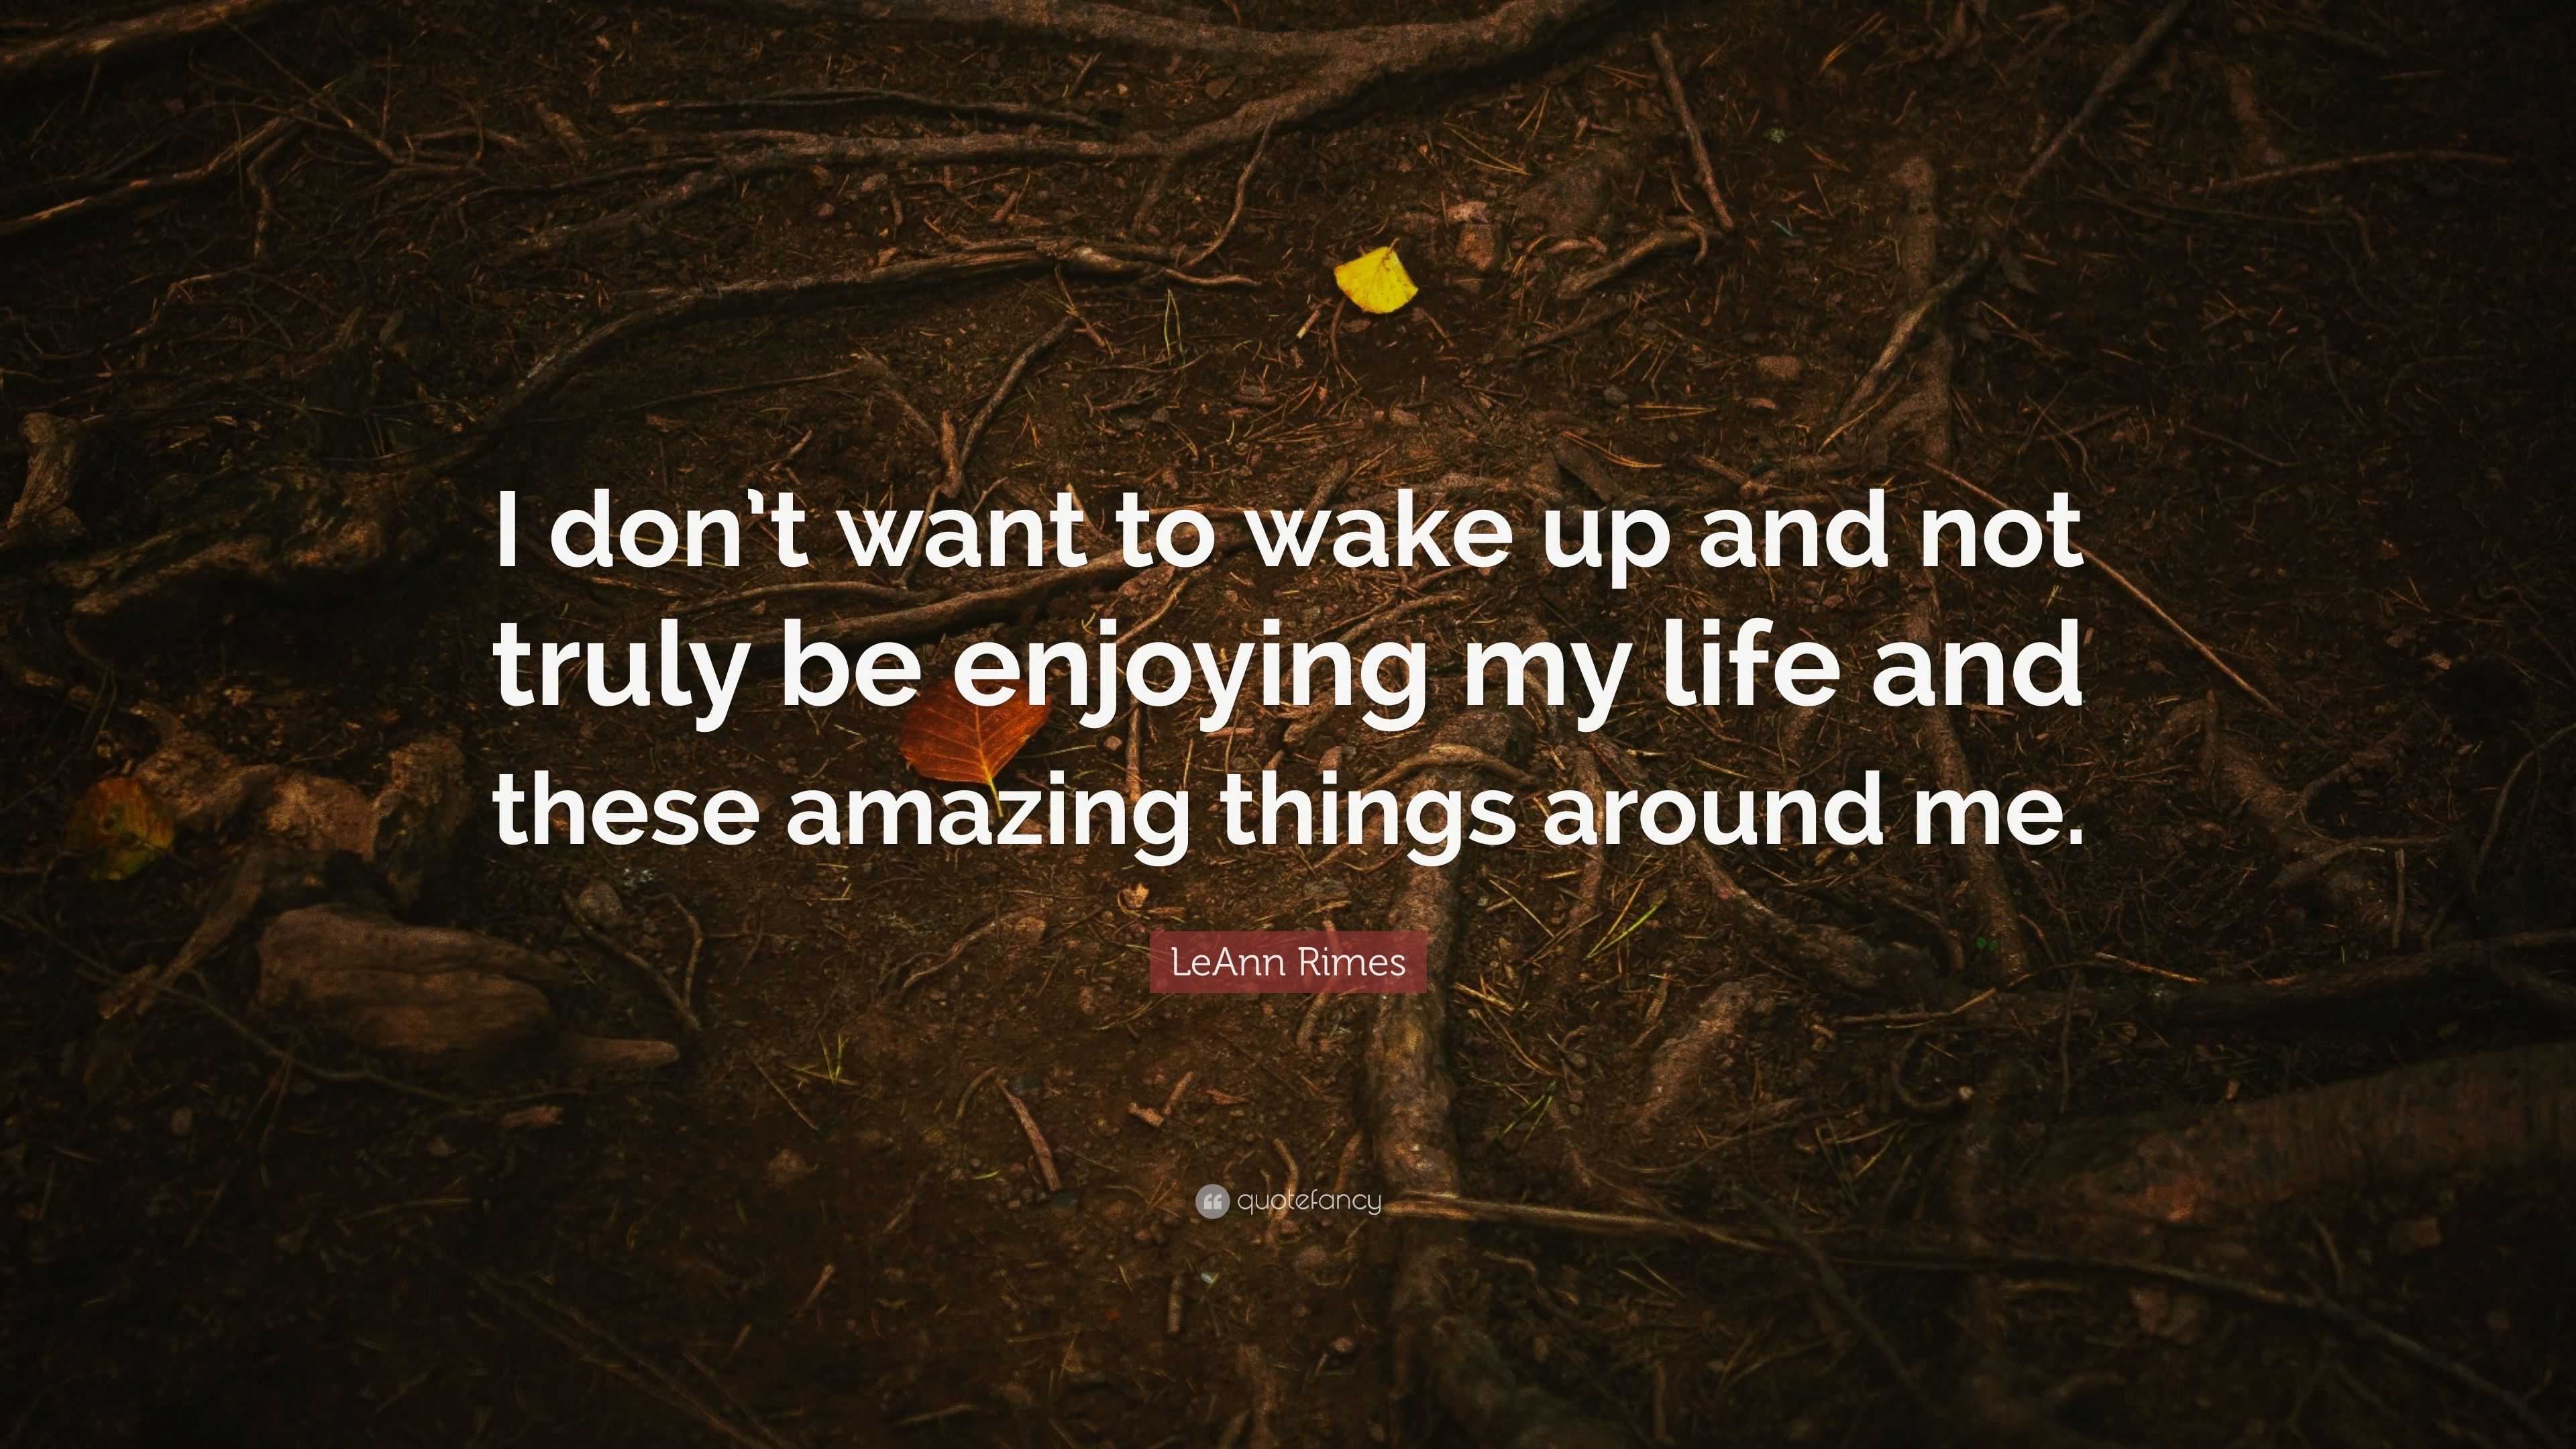 Leann Rimes Quote “i Dont Want To Wake Up And Not Truly Be Enjoying My Life And These Amazing 